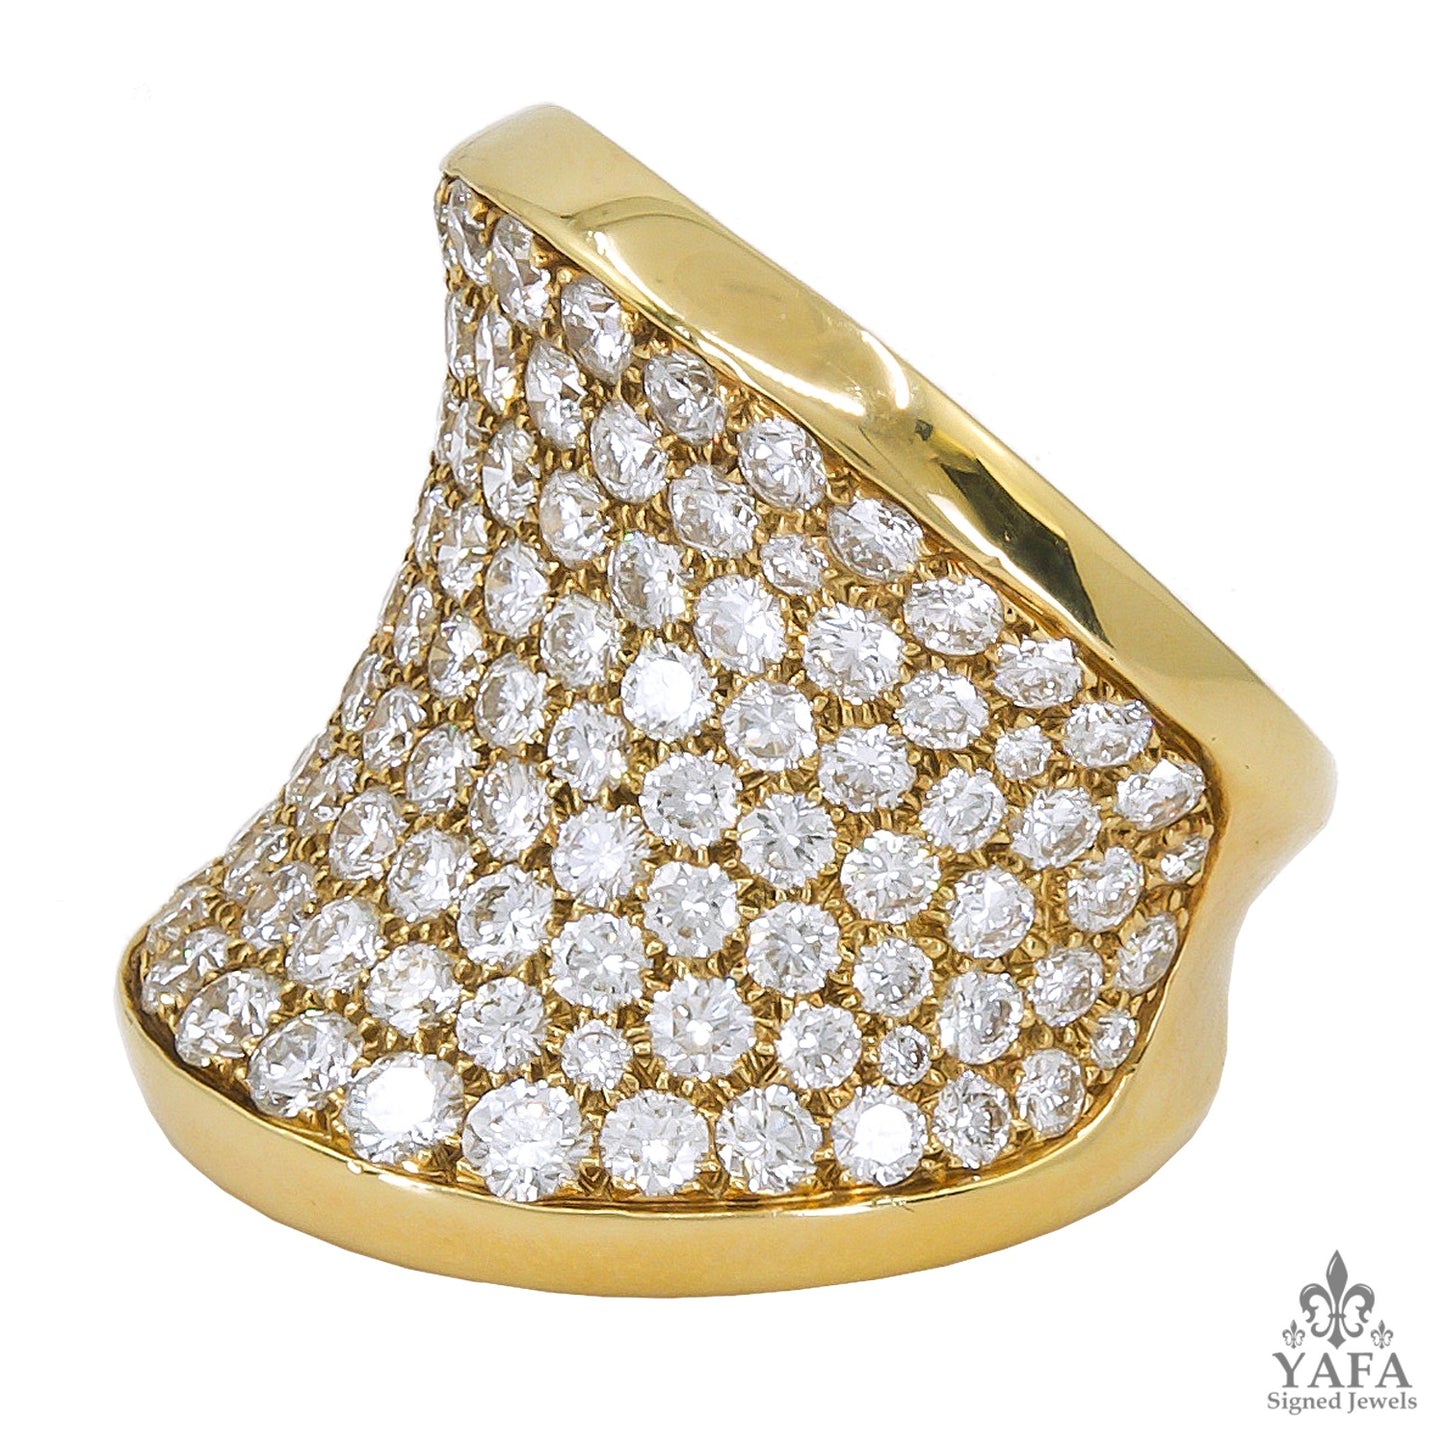 CARTIER Chalice Diamond Ring Gold